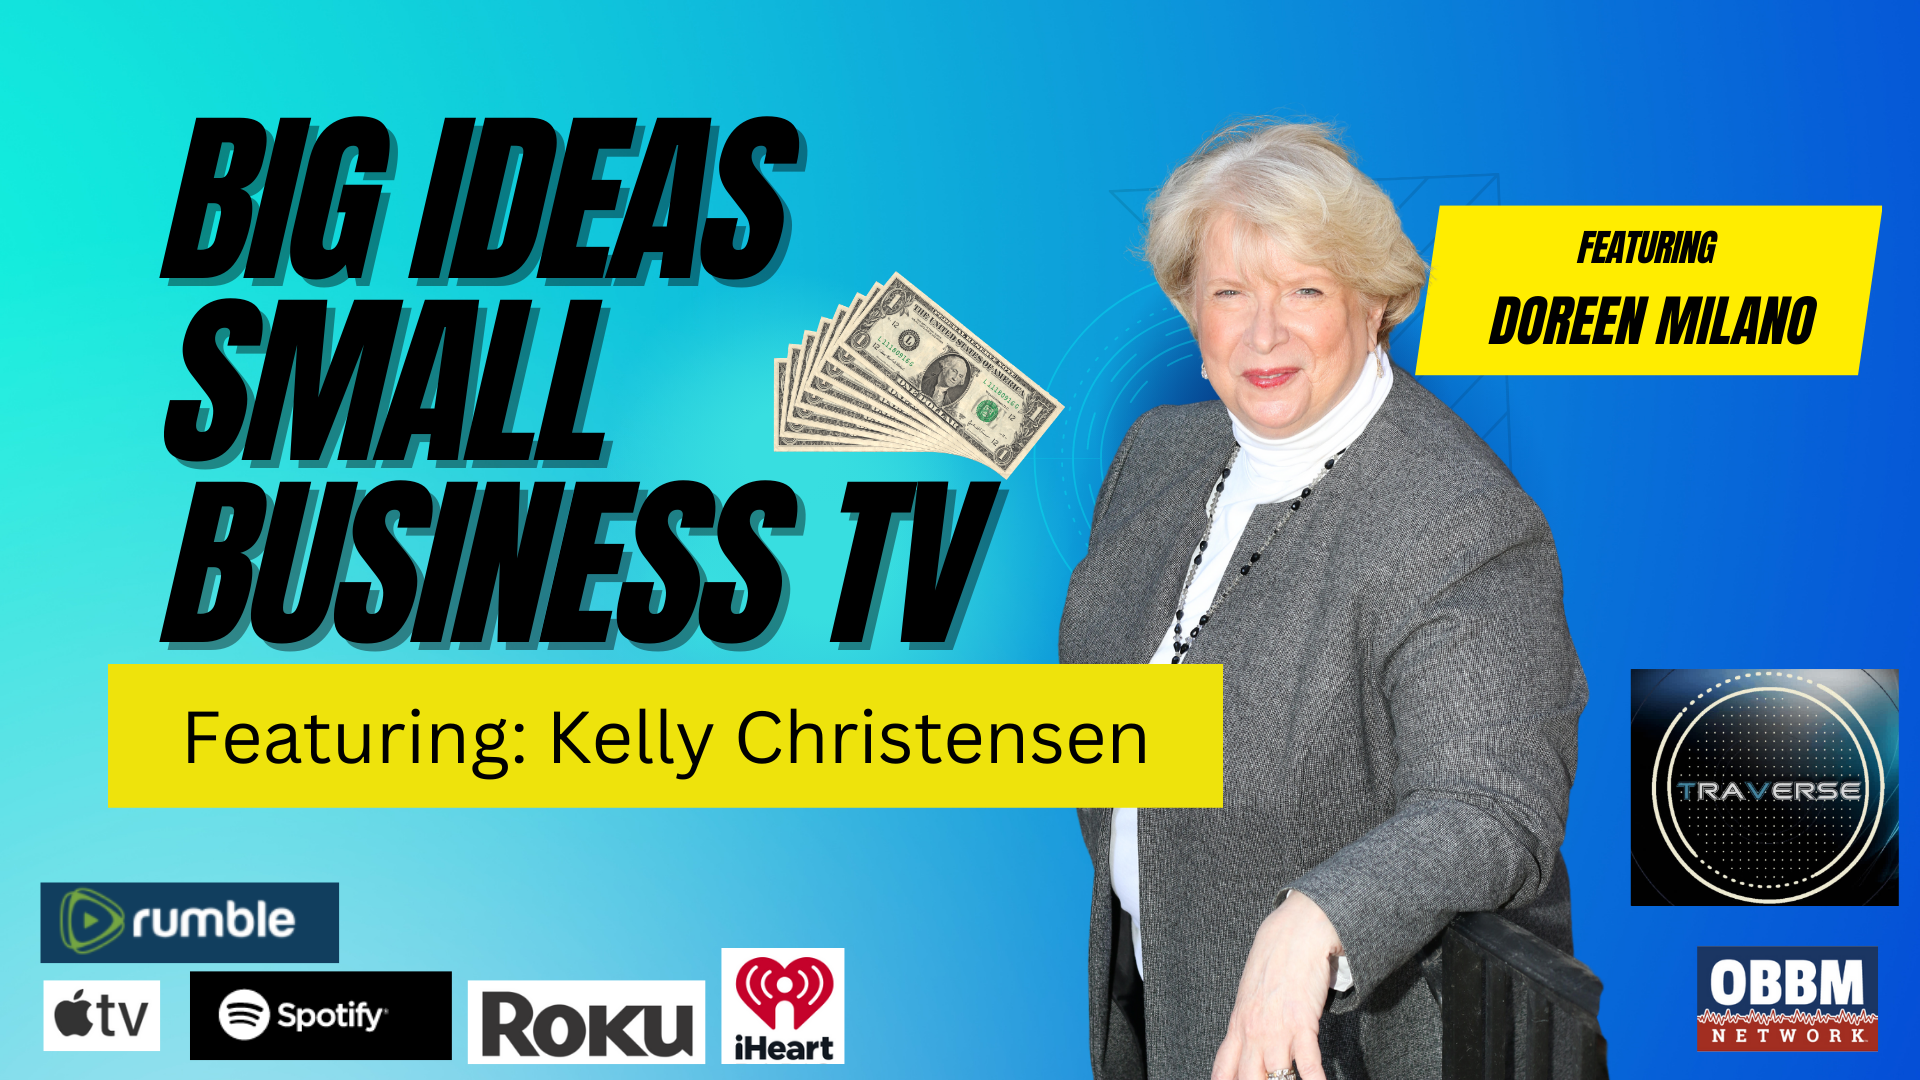 BISB37-Marketing is an Emotional Connection - Big Ideas, Small Business TV